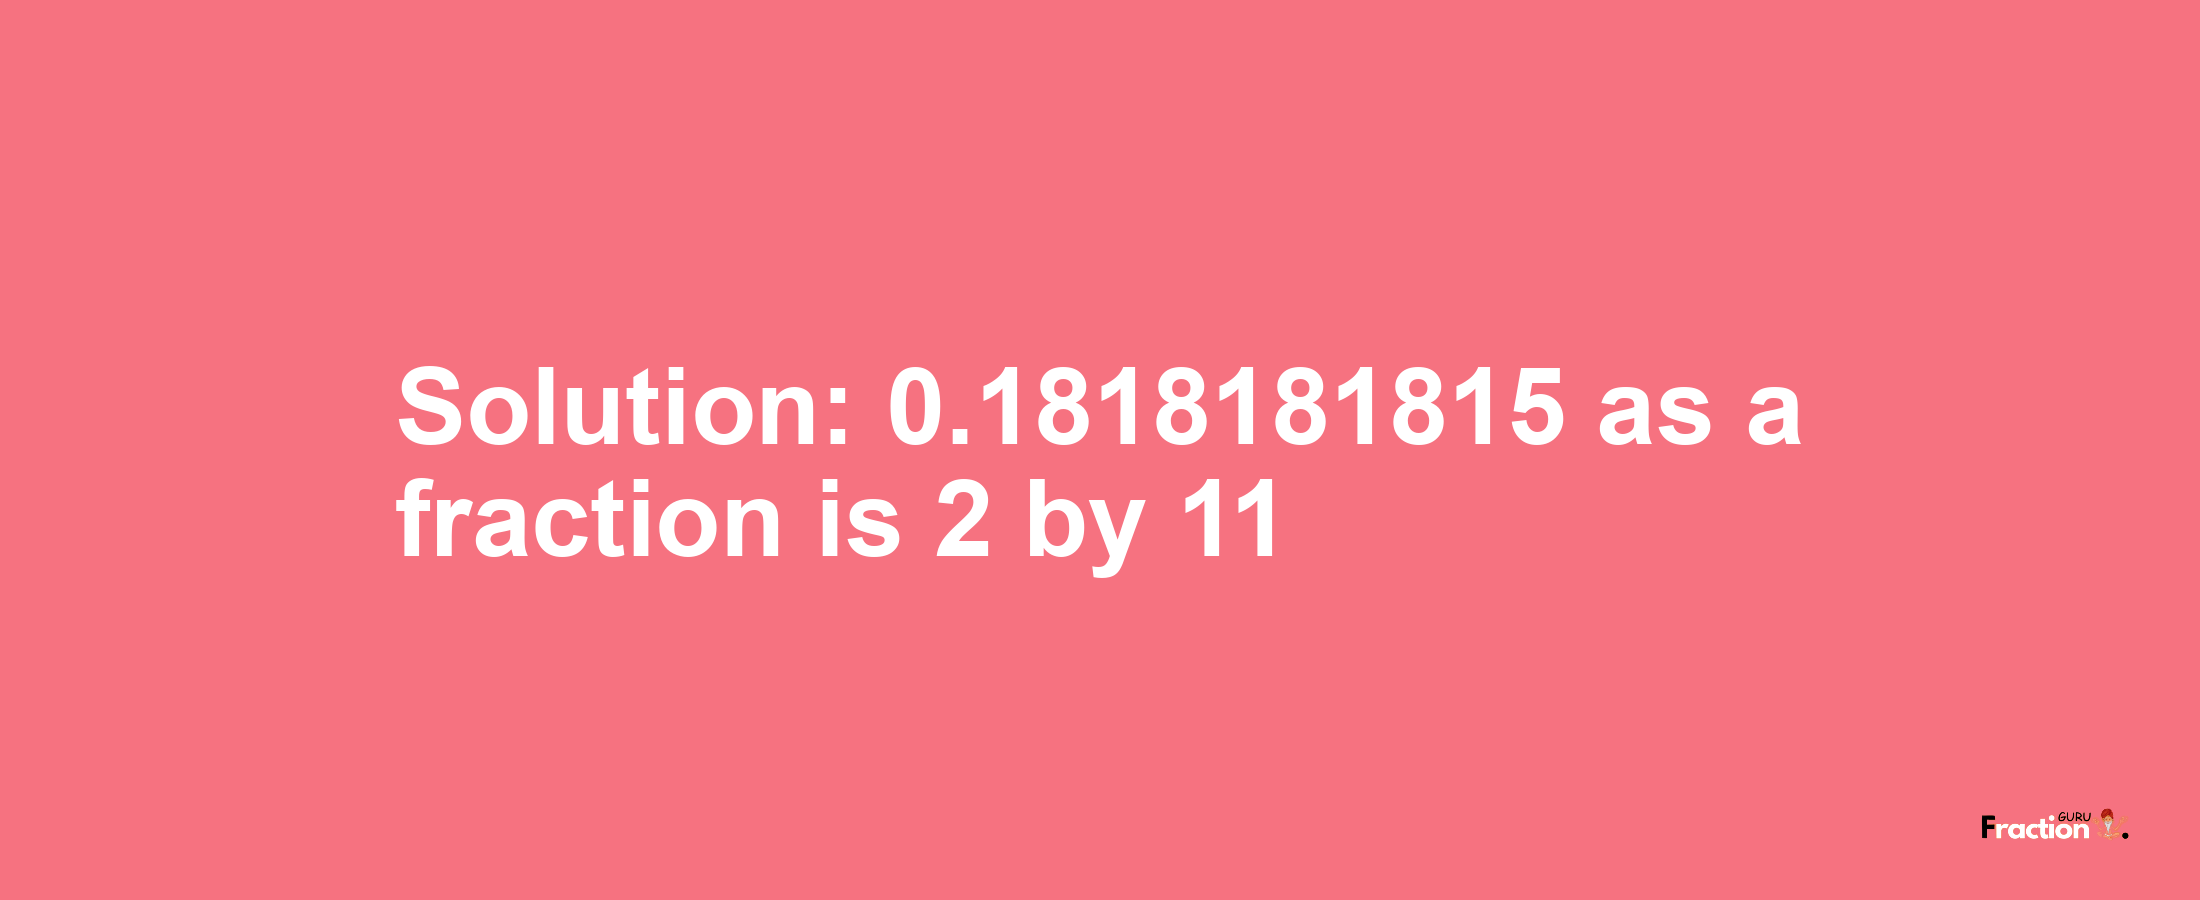 Solution:0.1818181815 as a fraction is 2/11